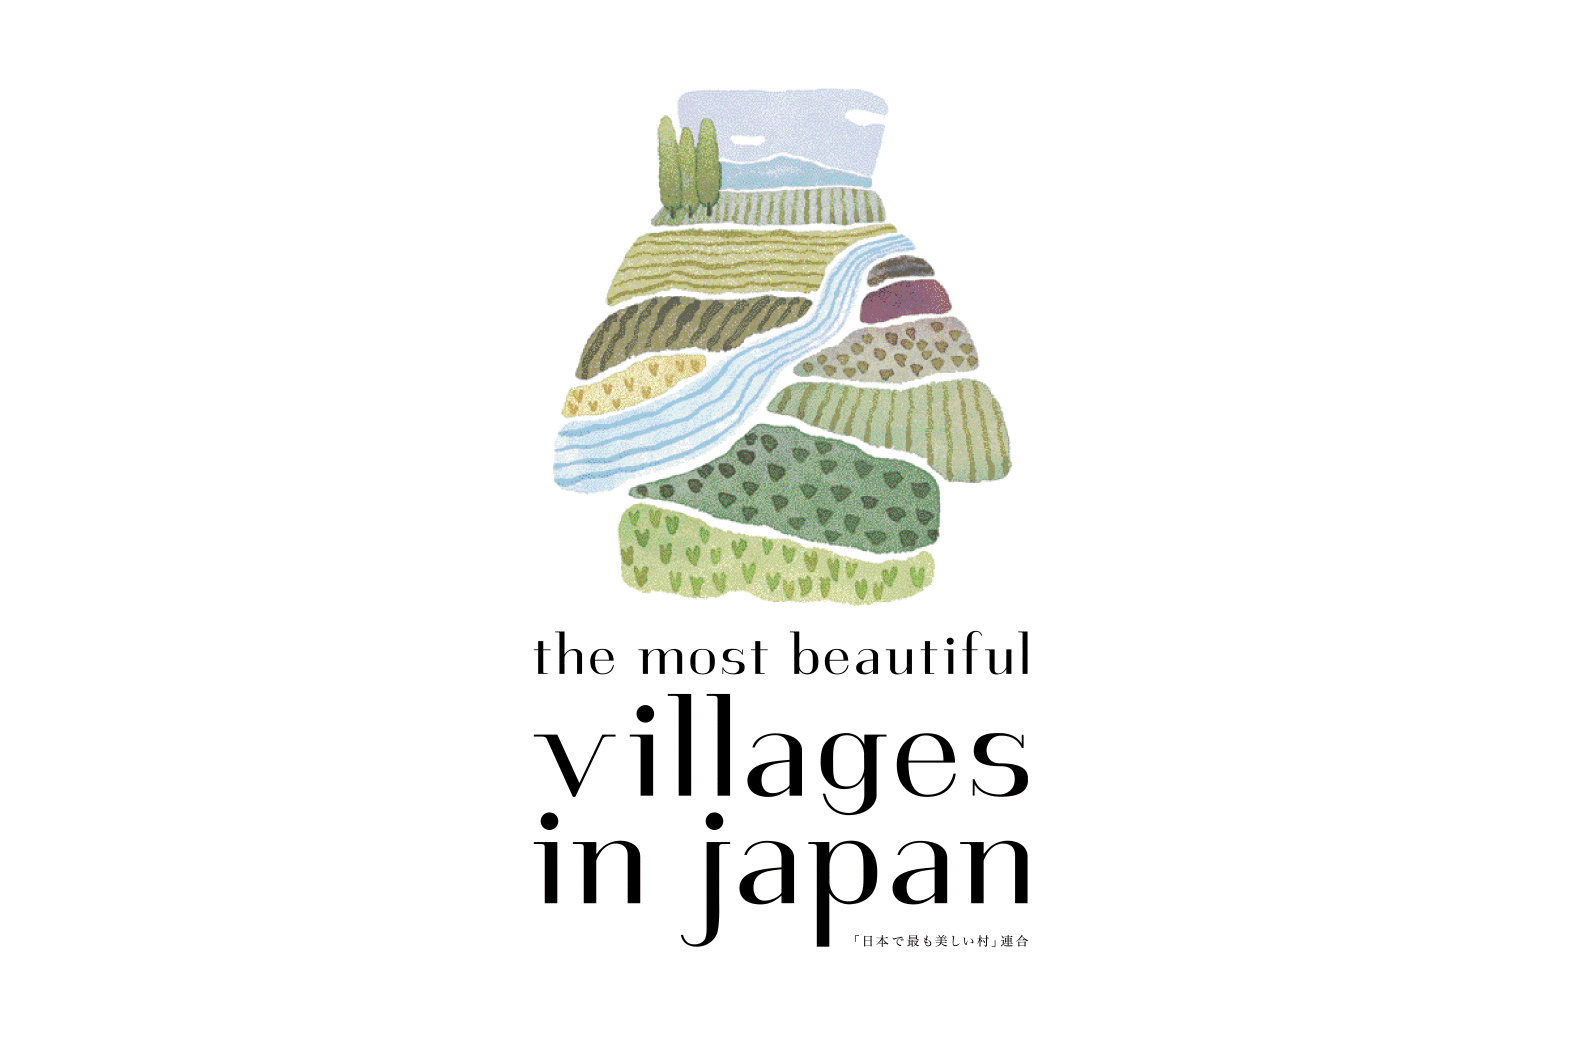 The most beautiful villages in Japan.日本で最も美しい村 高山村 